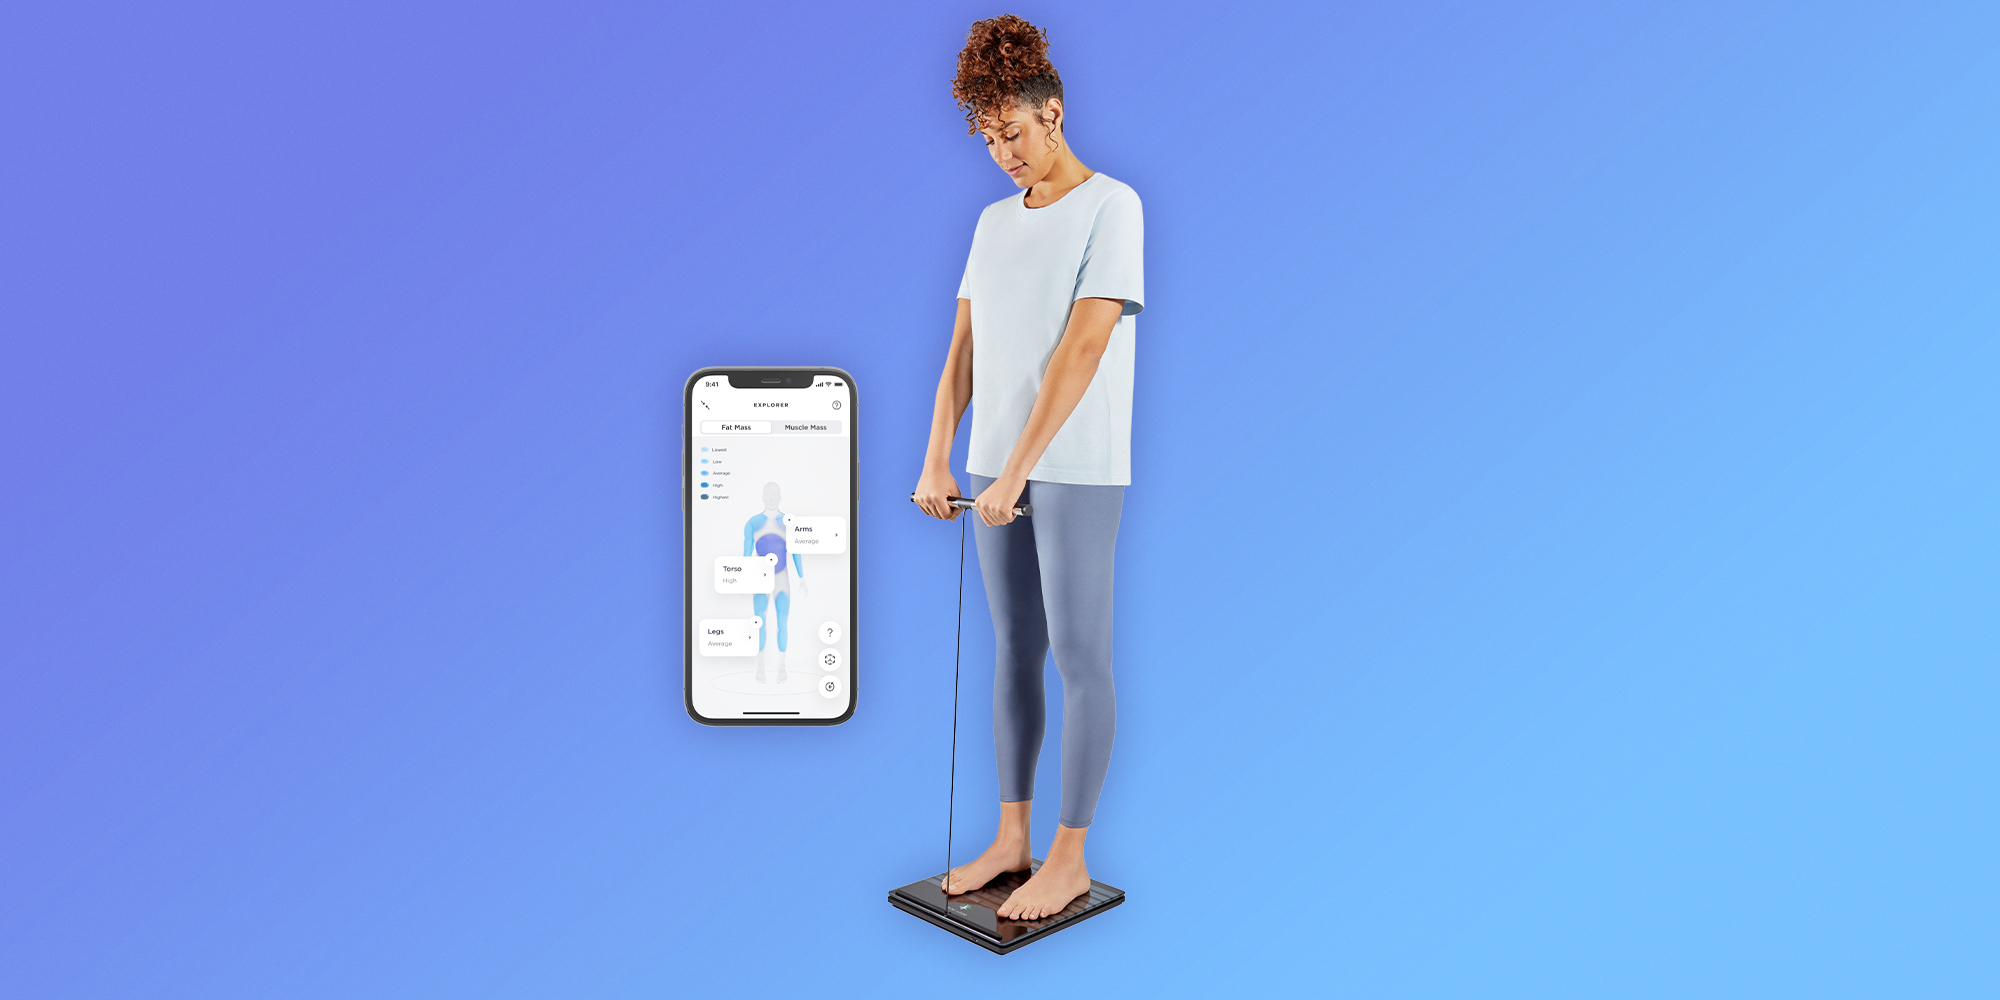 Electrical impedance body scale with App - Beper